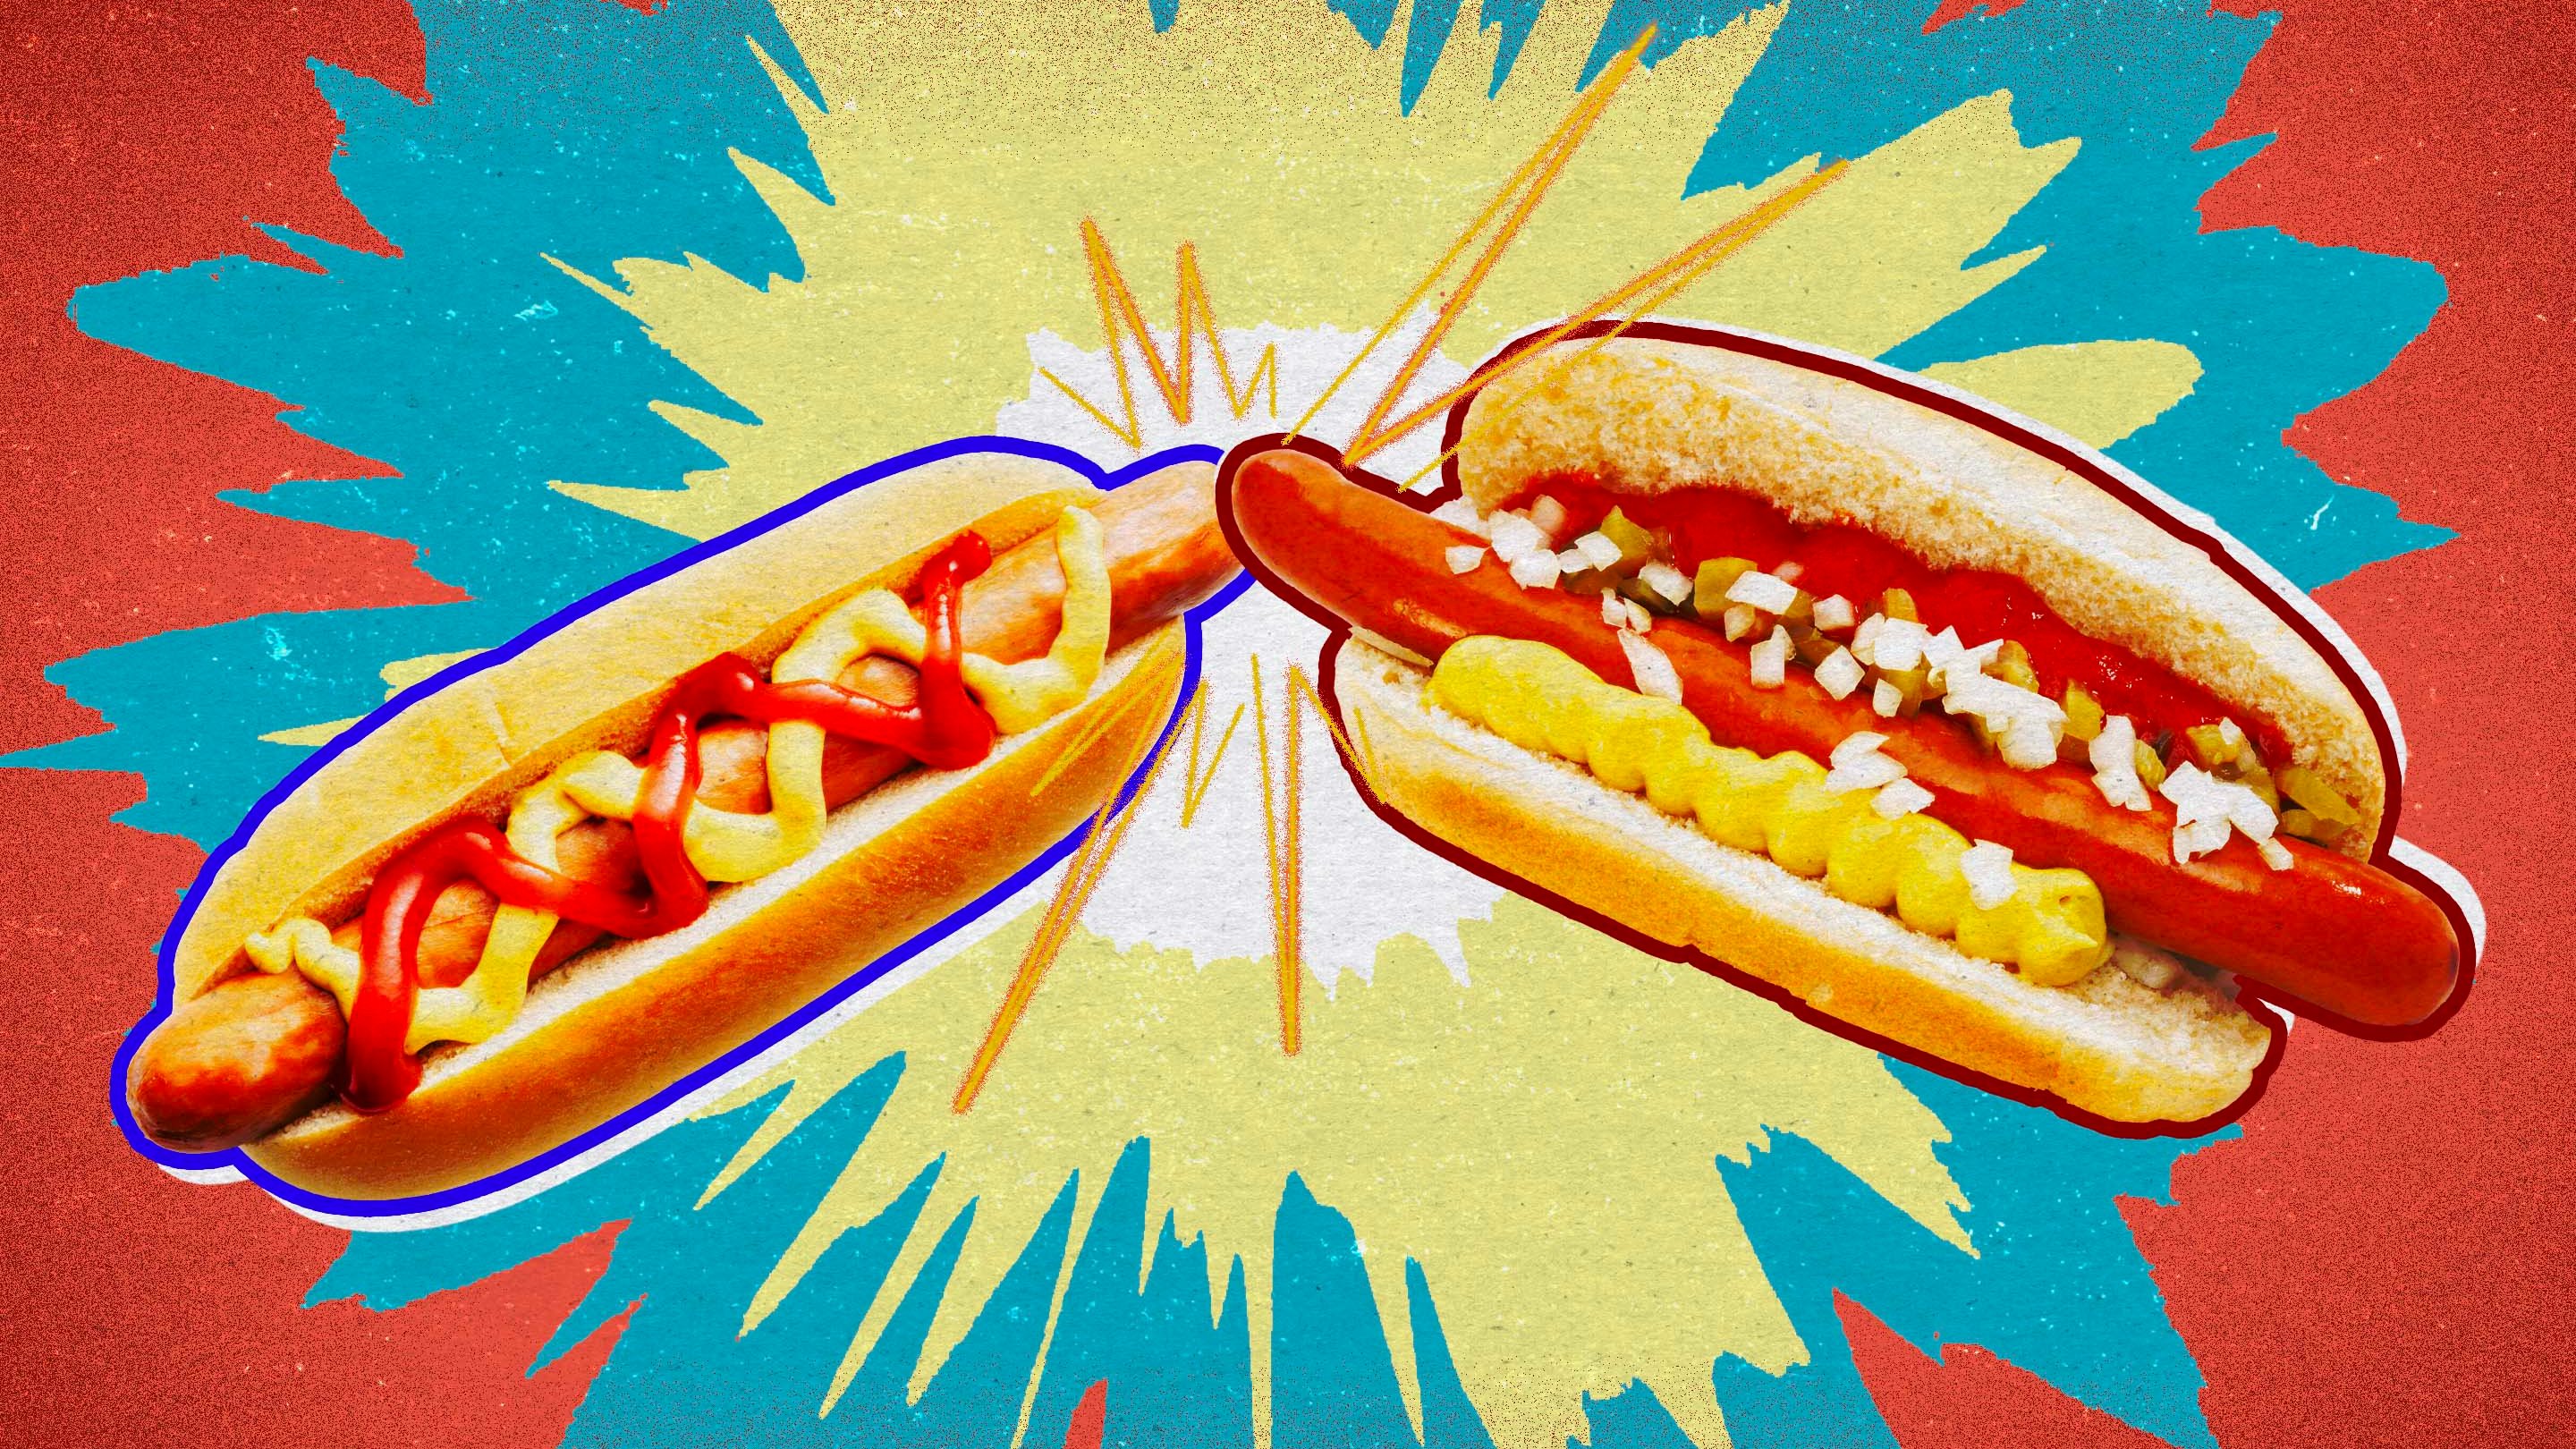 The Hot Dog War Between Sam's Club and Costco